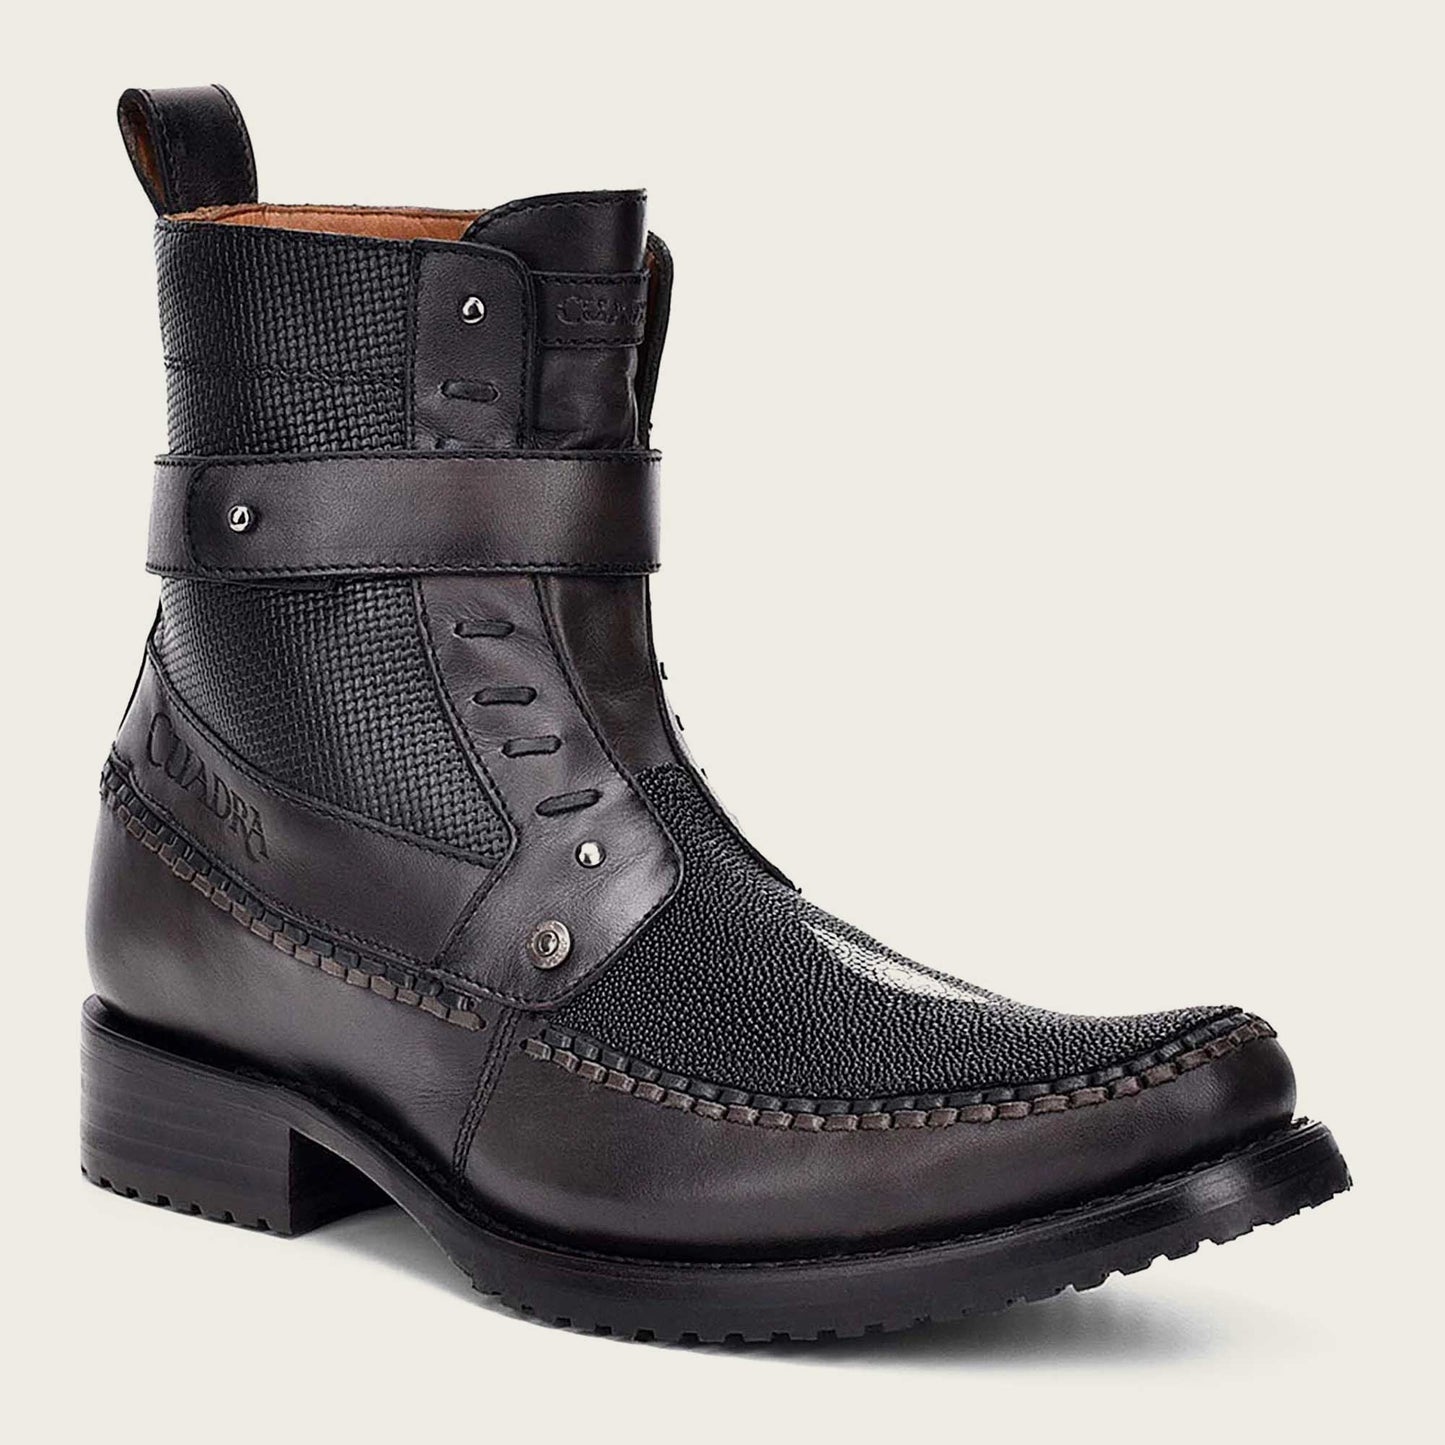 Step up your style with our handwoven black leather boot. Perfect for any occasion, these boots are a timeless addition to your wardrobe.